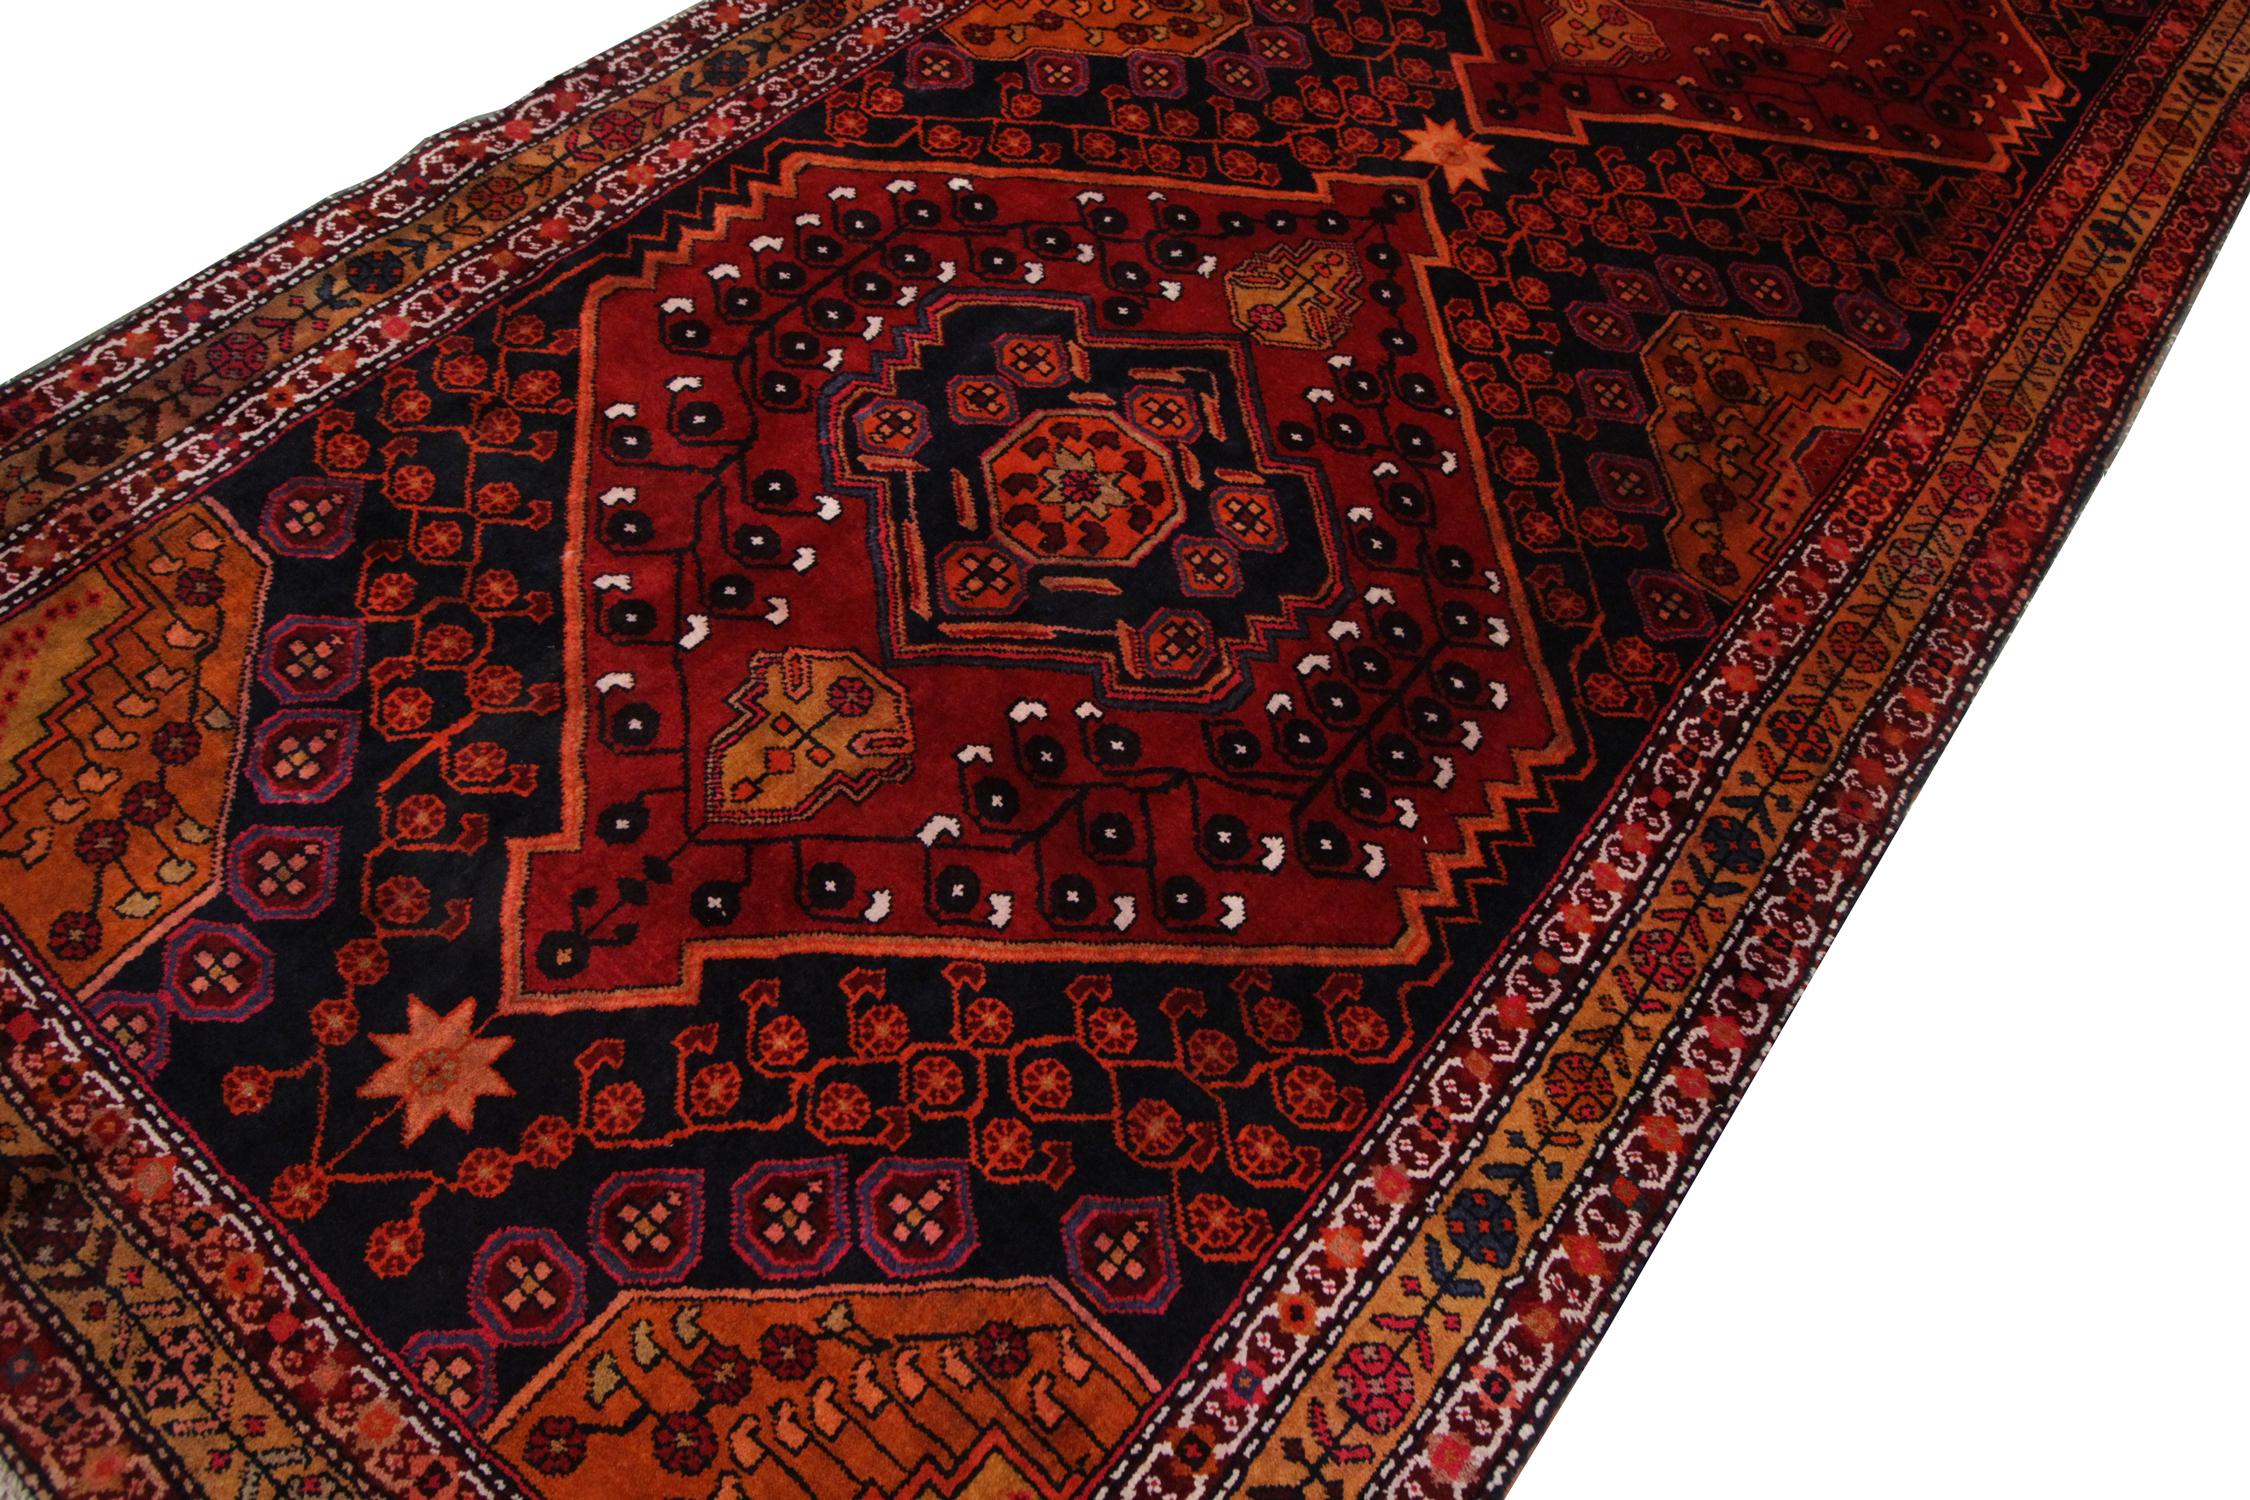 Antique rug handmade carpet with intricate design and deep oranges and reds, perfect for any modern or traditional home decor. This Oriental rug Caucasian runner rug had been handwoven and constructed with the finest hand-spun wool which is dyed